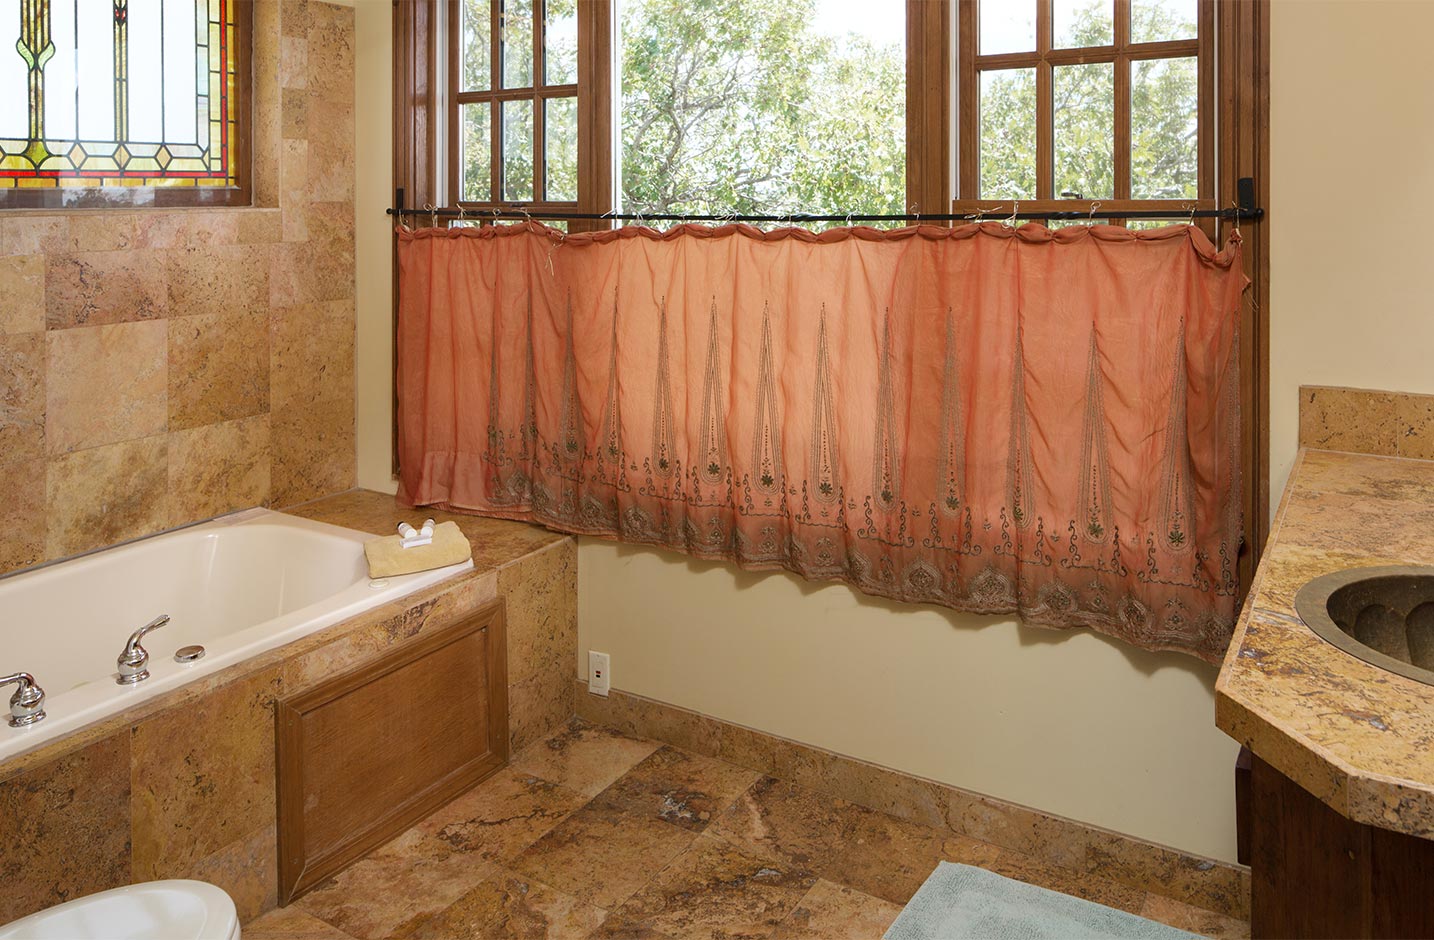 Bathroom with a large tub and windows